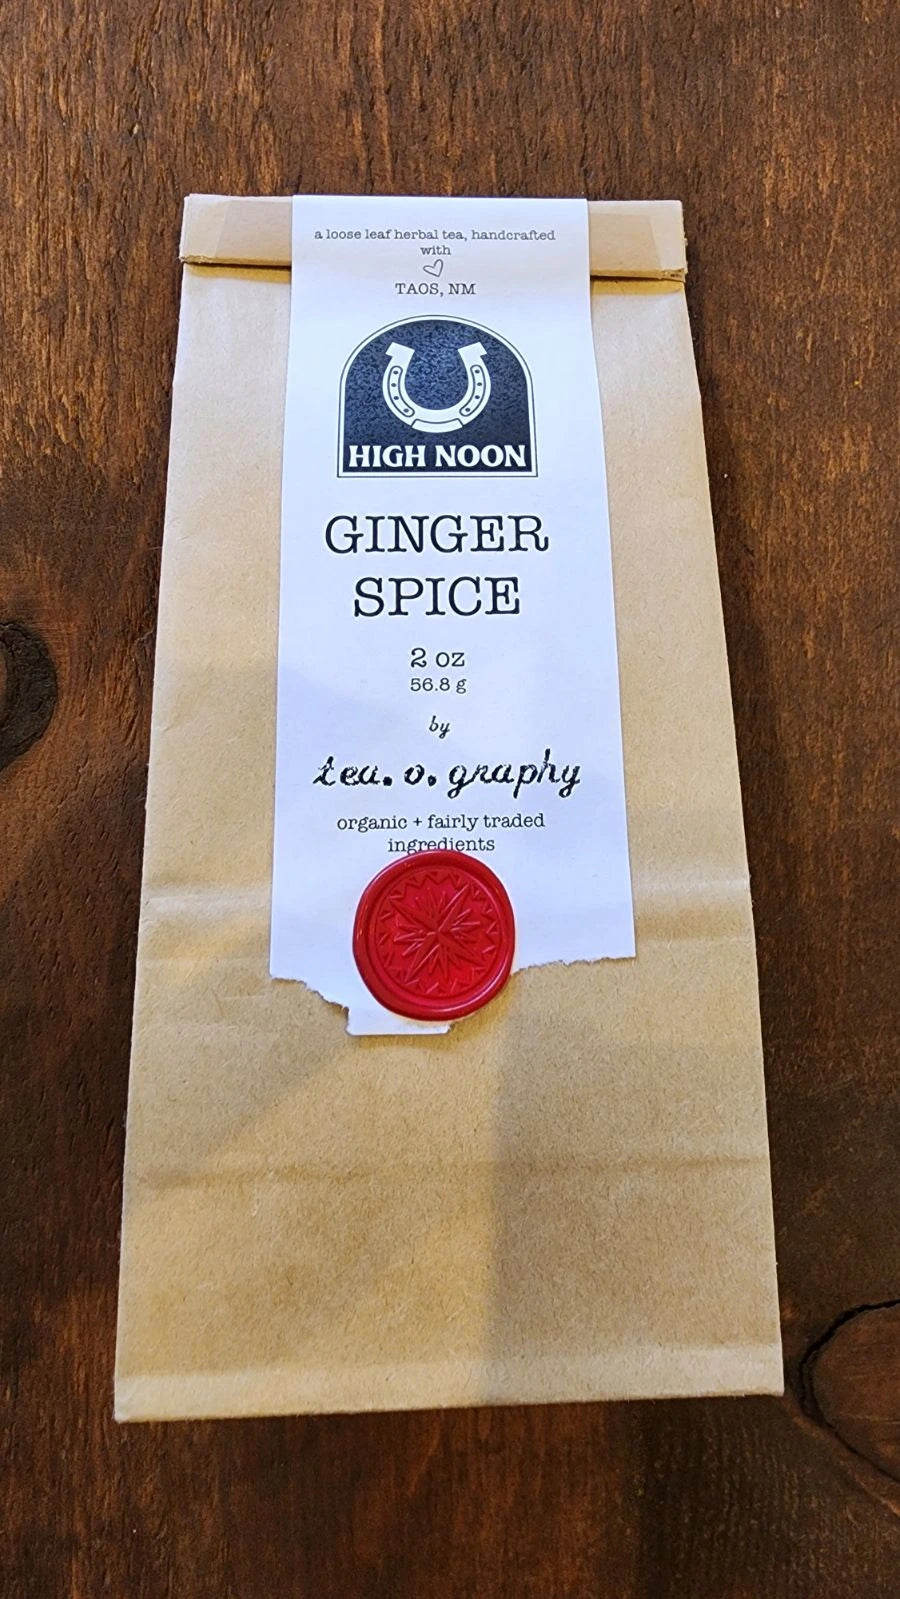 High Noon General Store x tea.o.graphy Tea | Ginger Spice